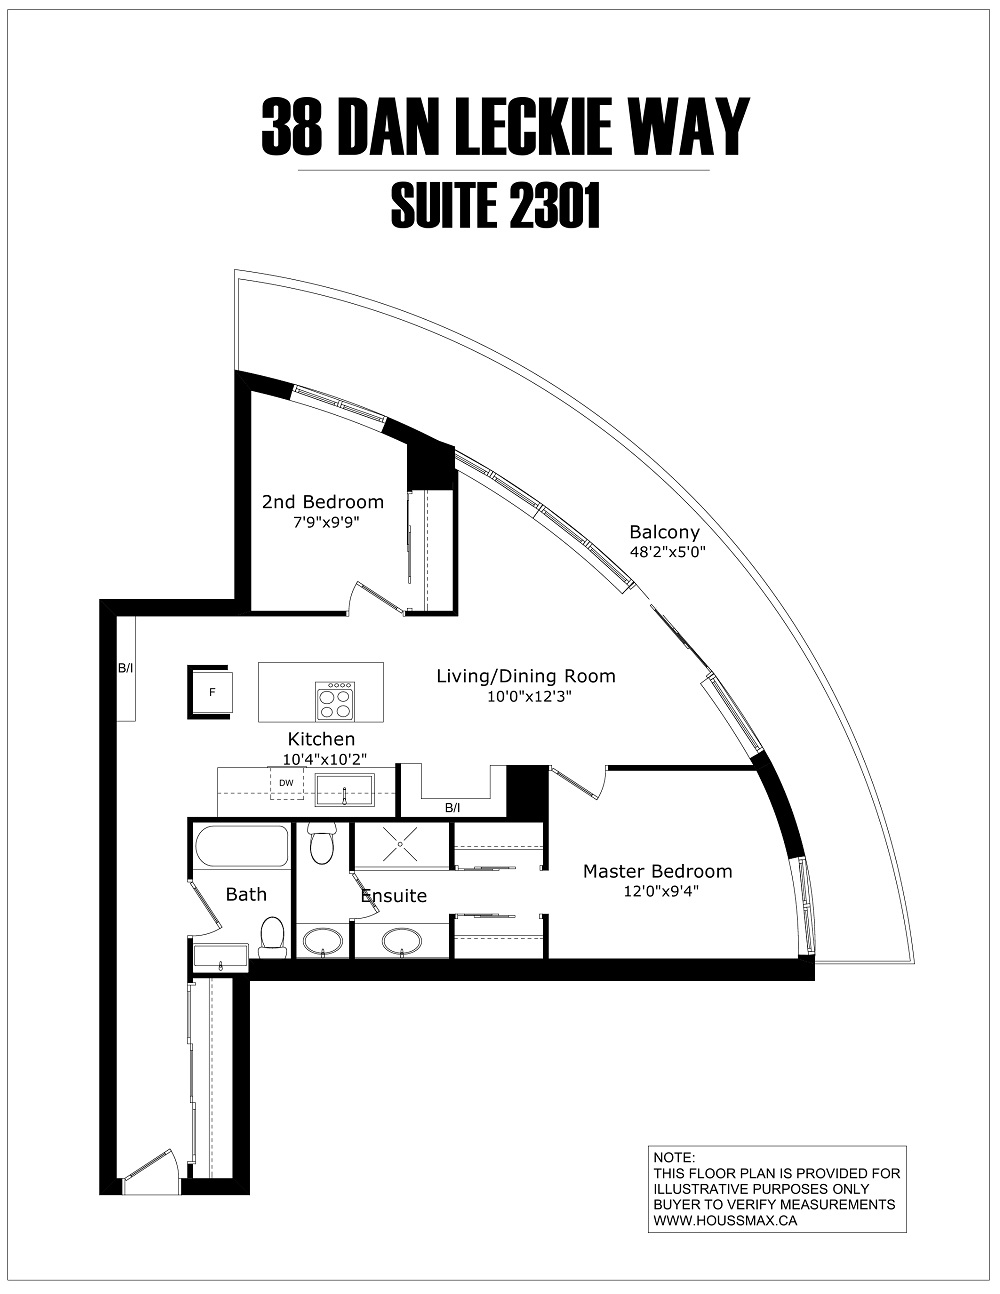 Condo floor plans and layout.